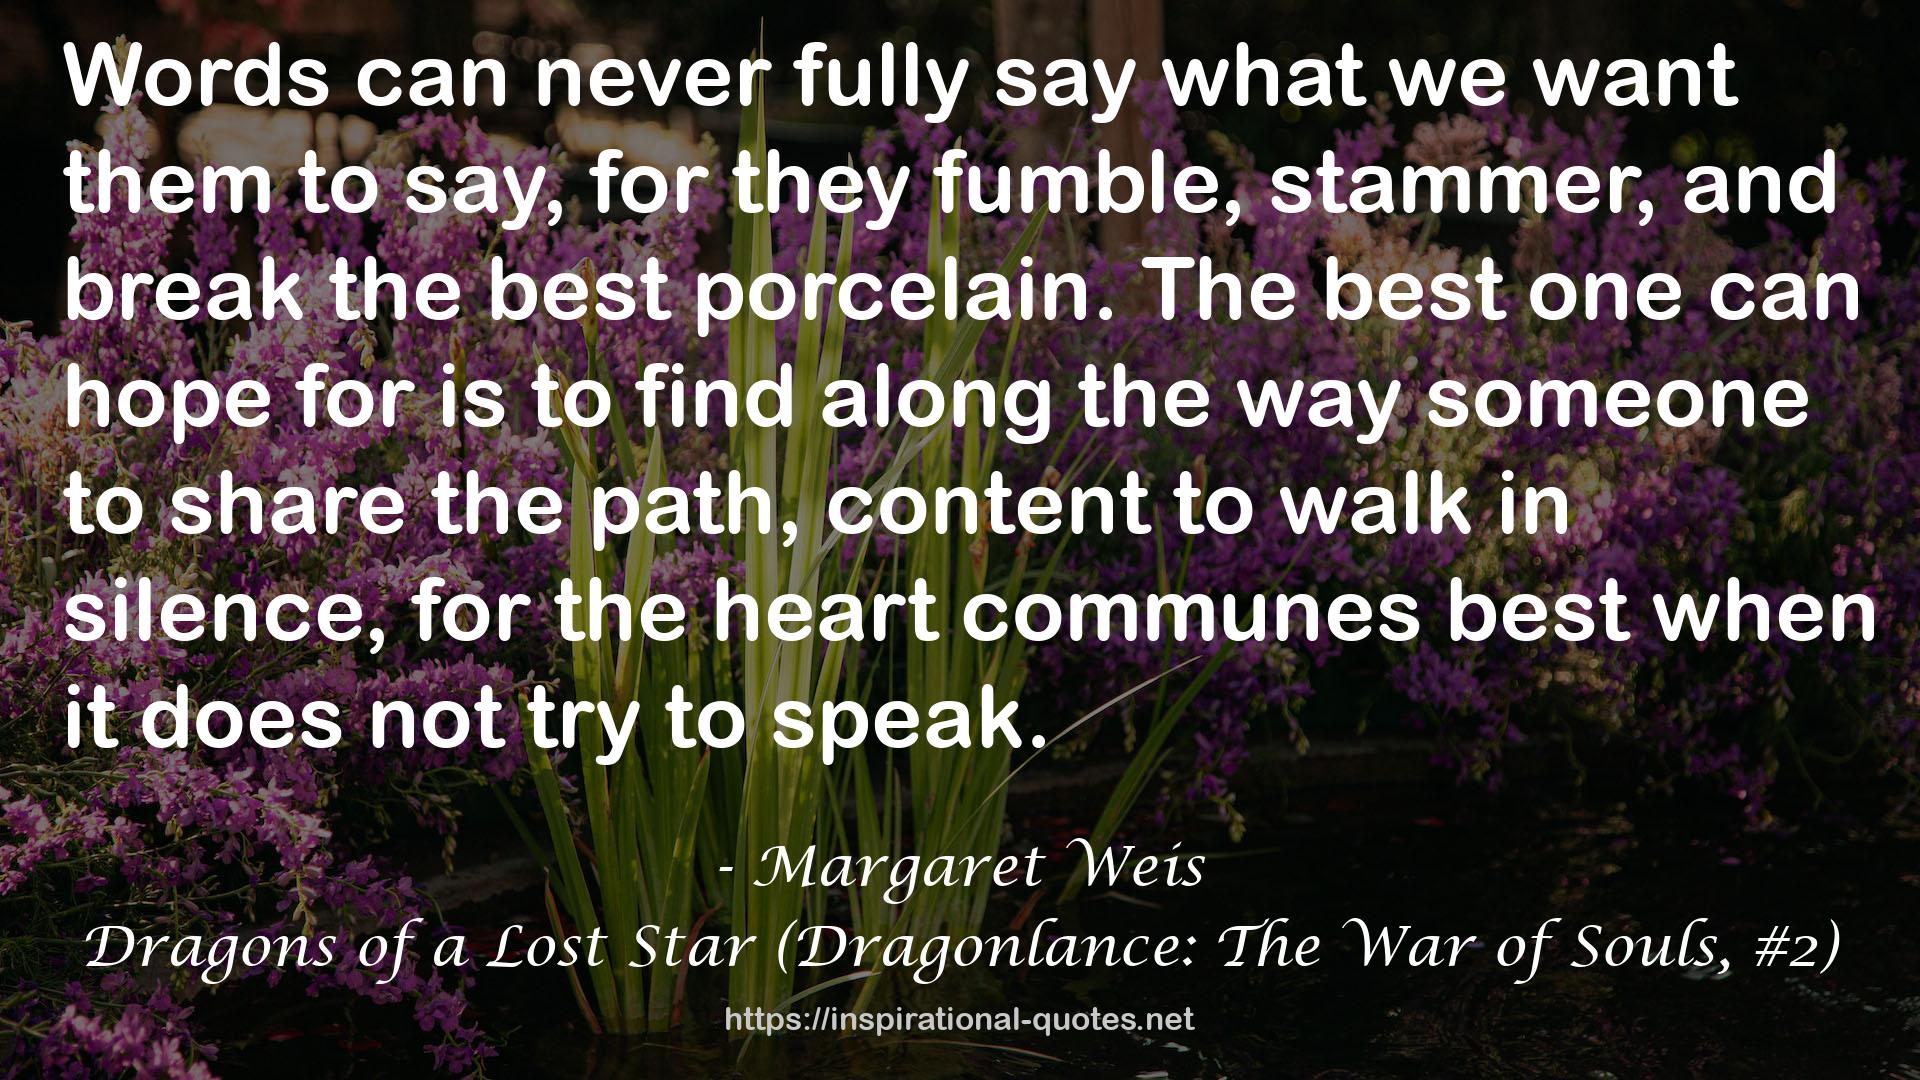 Margaret Weis QUOTES